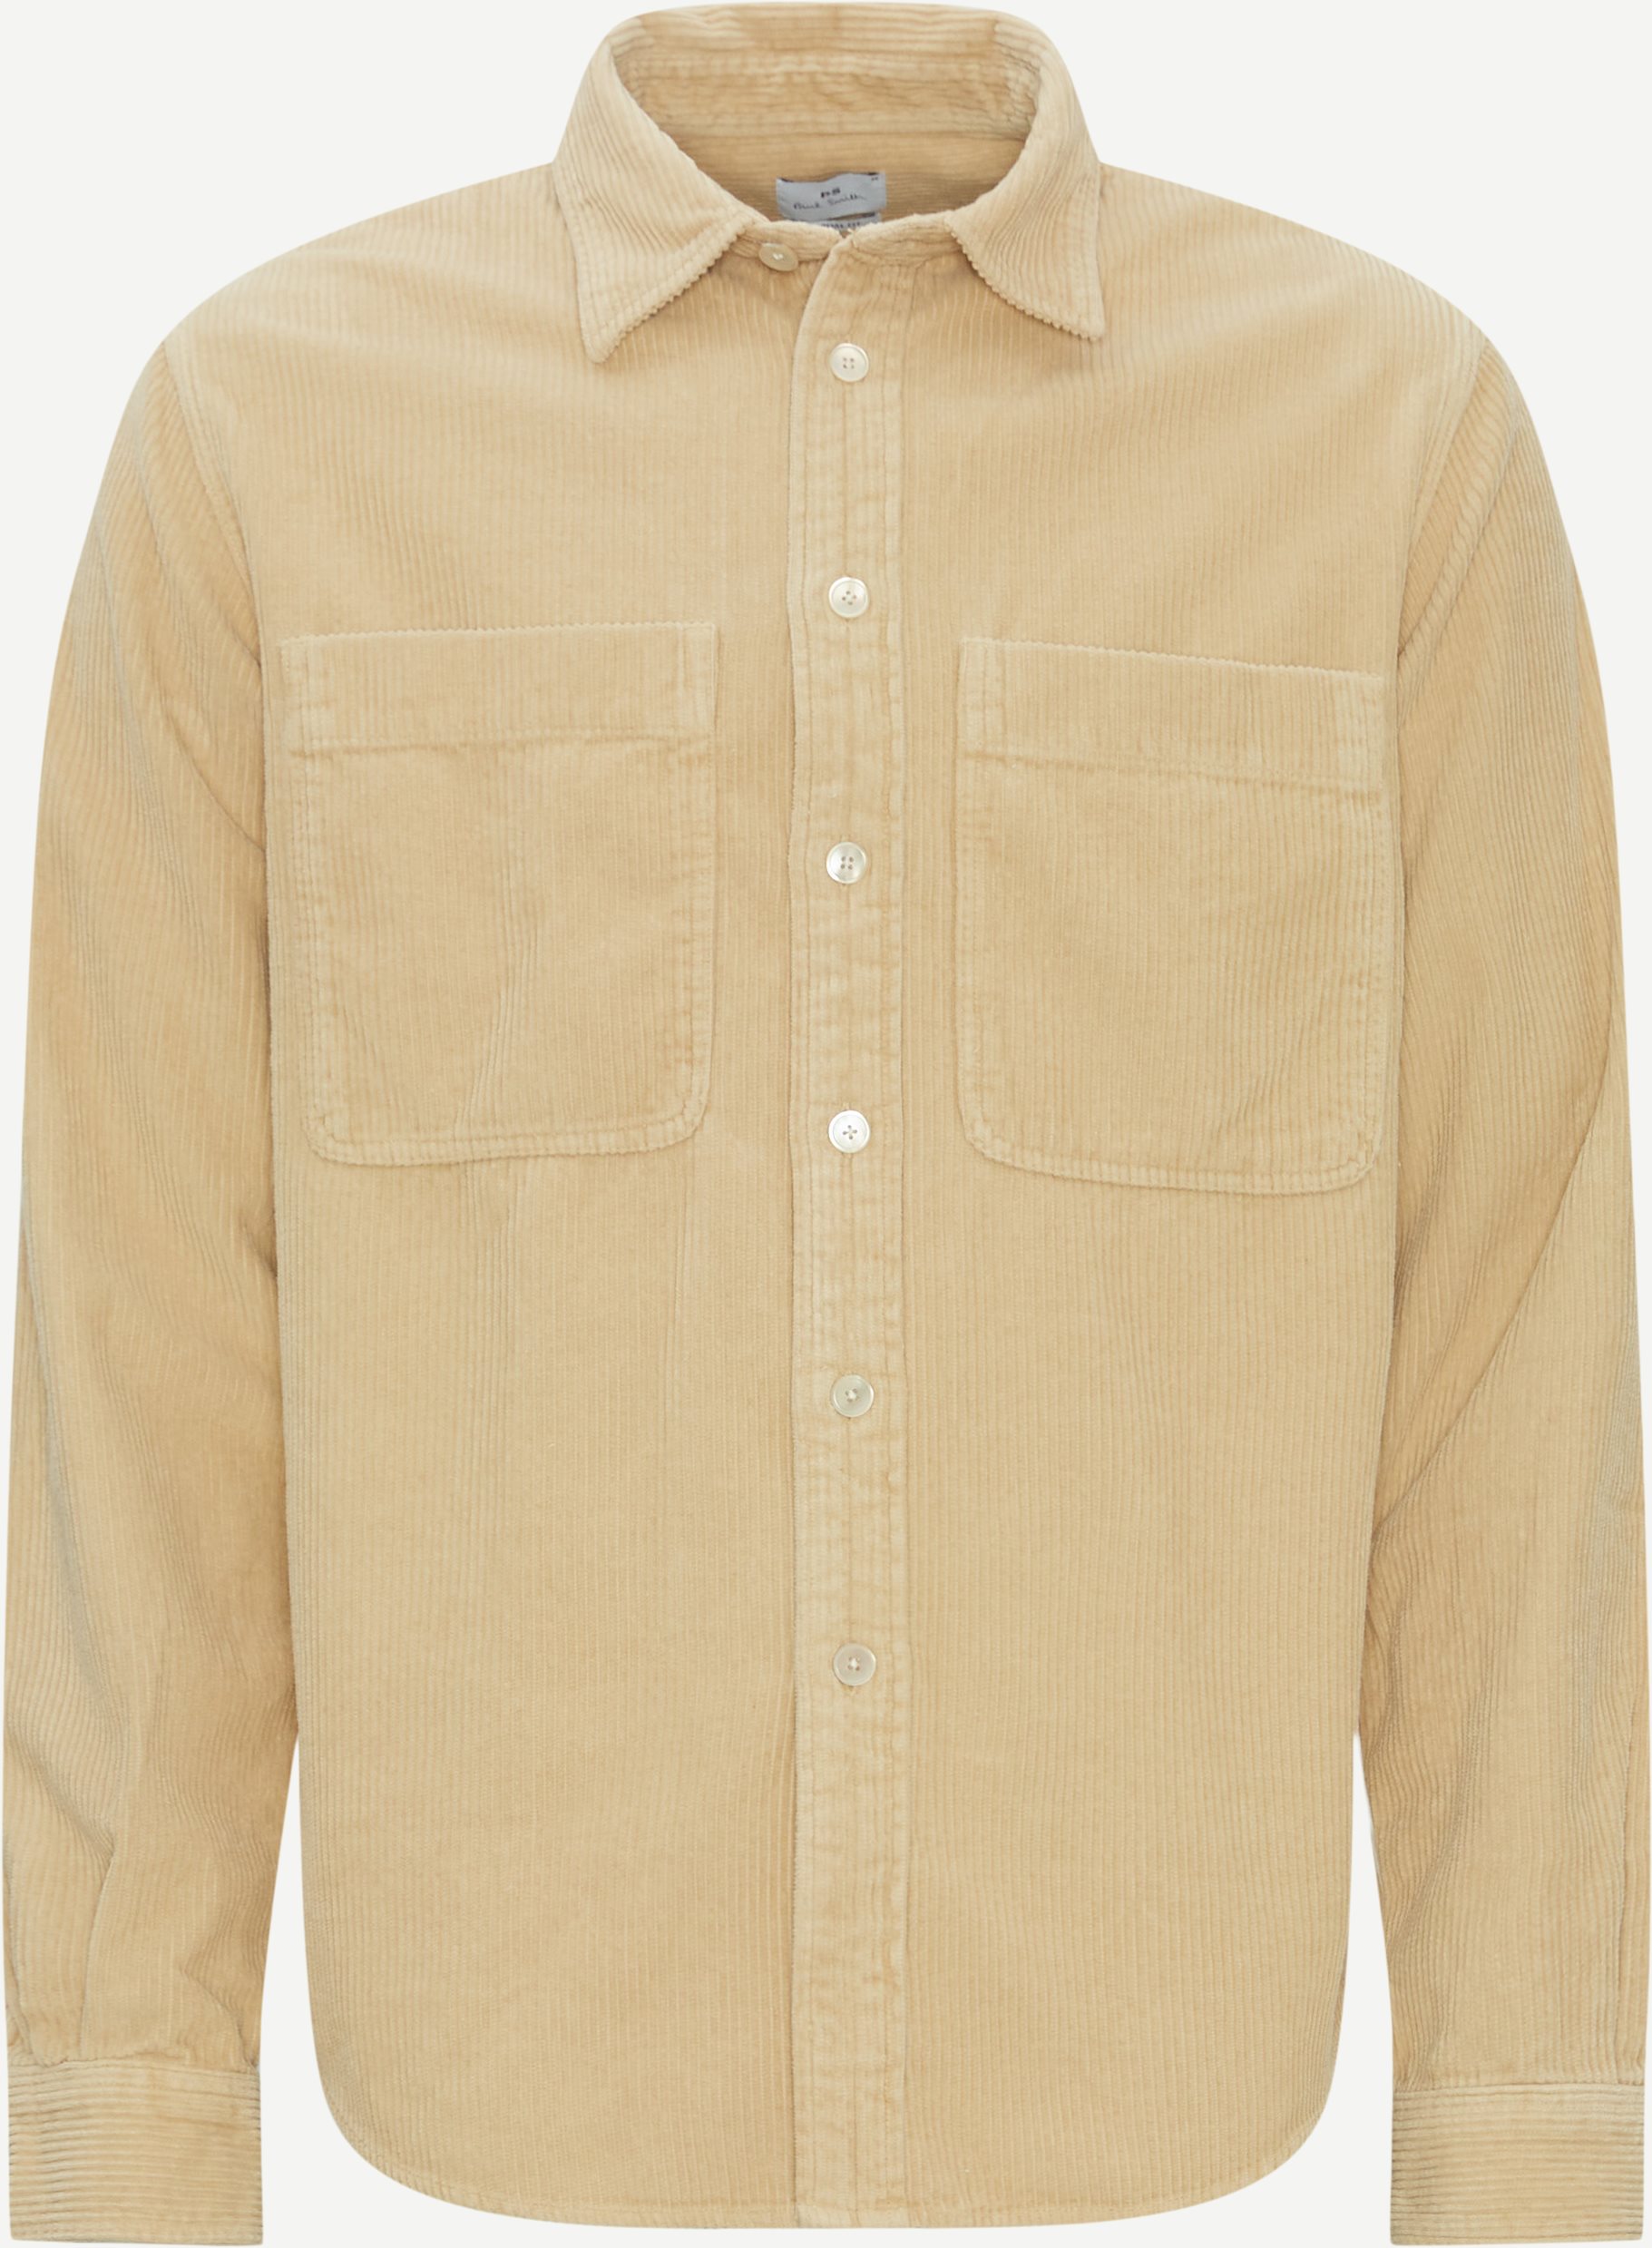 PS Paul Smith Skjortor 450Y-M21950 MENS LS CASUAL FIT SHIRT Sand